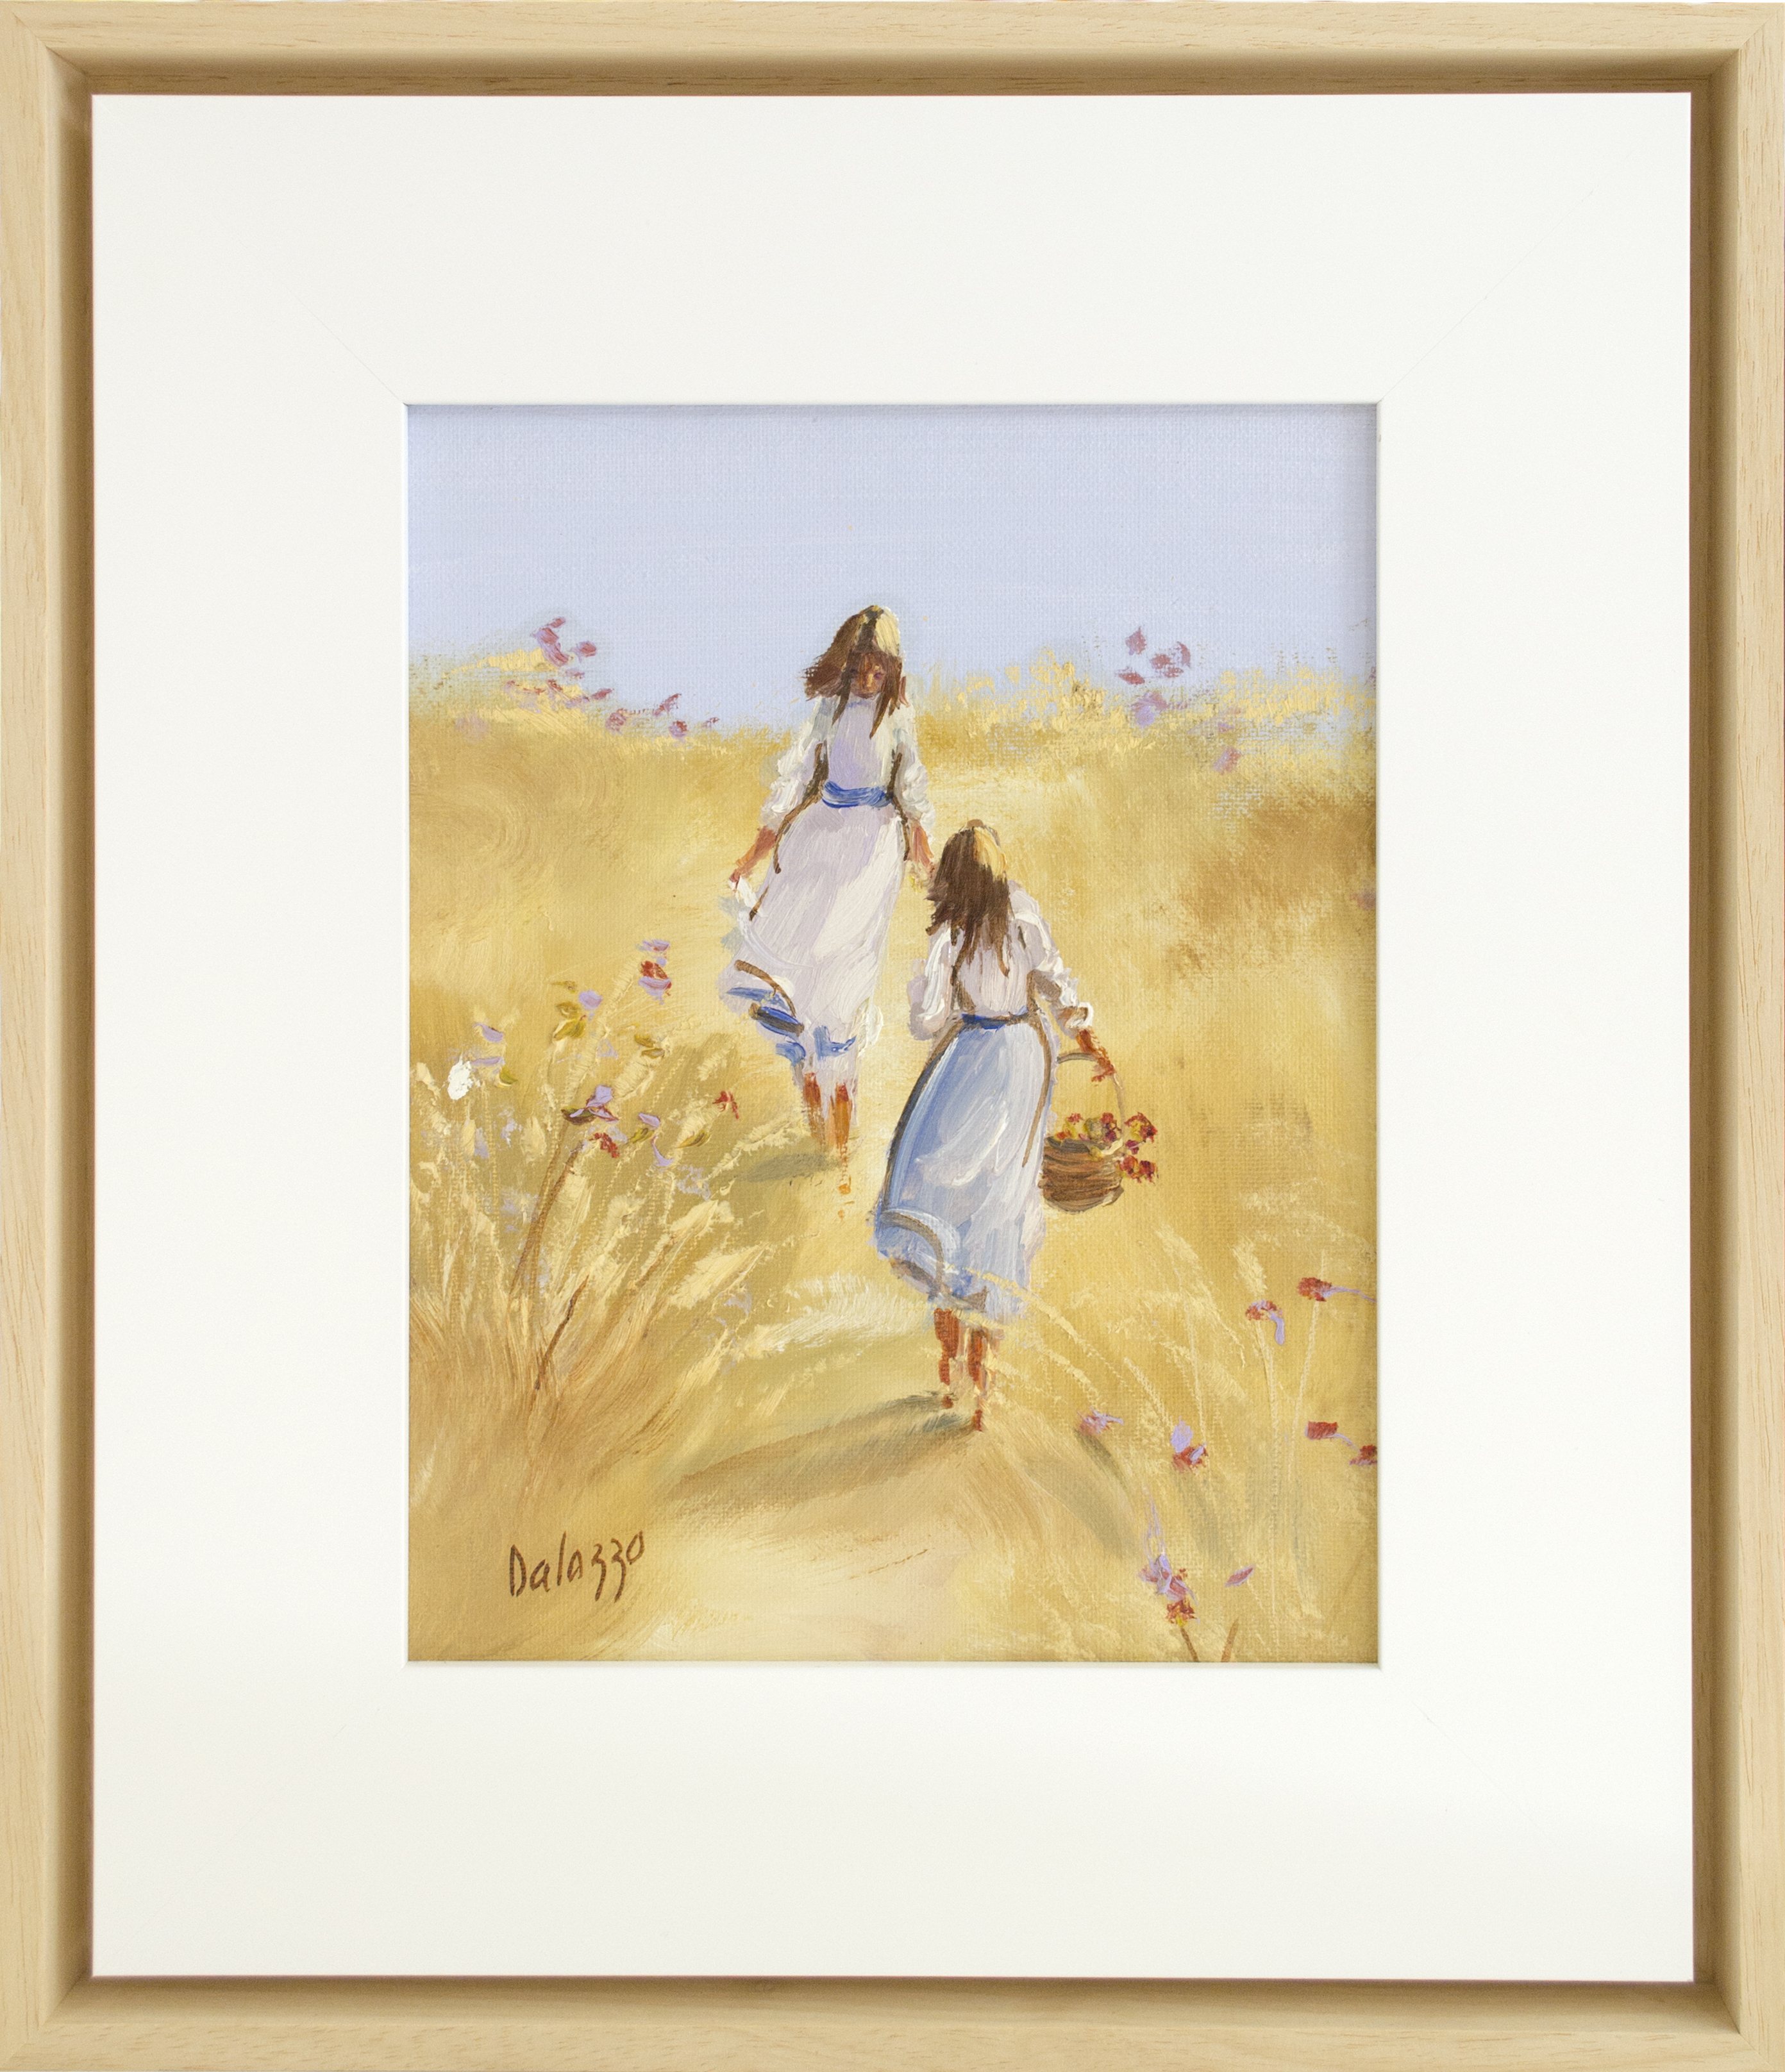 Framed Front View Of Romantic Painting "First Pickings" By Lucette Dalozzo